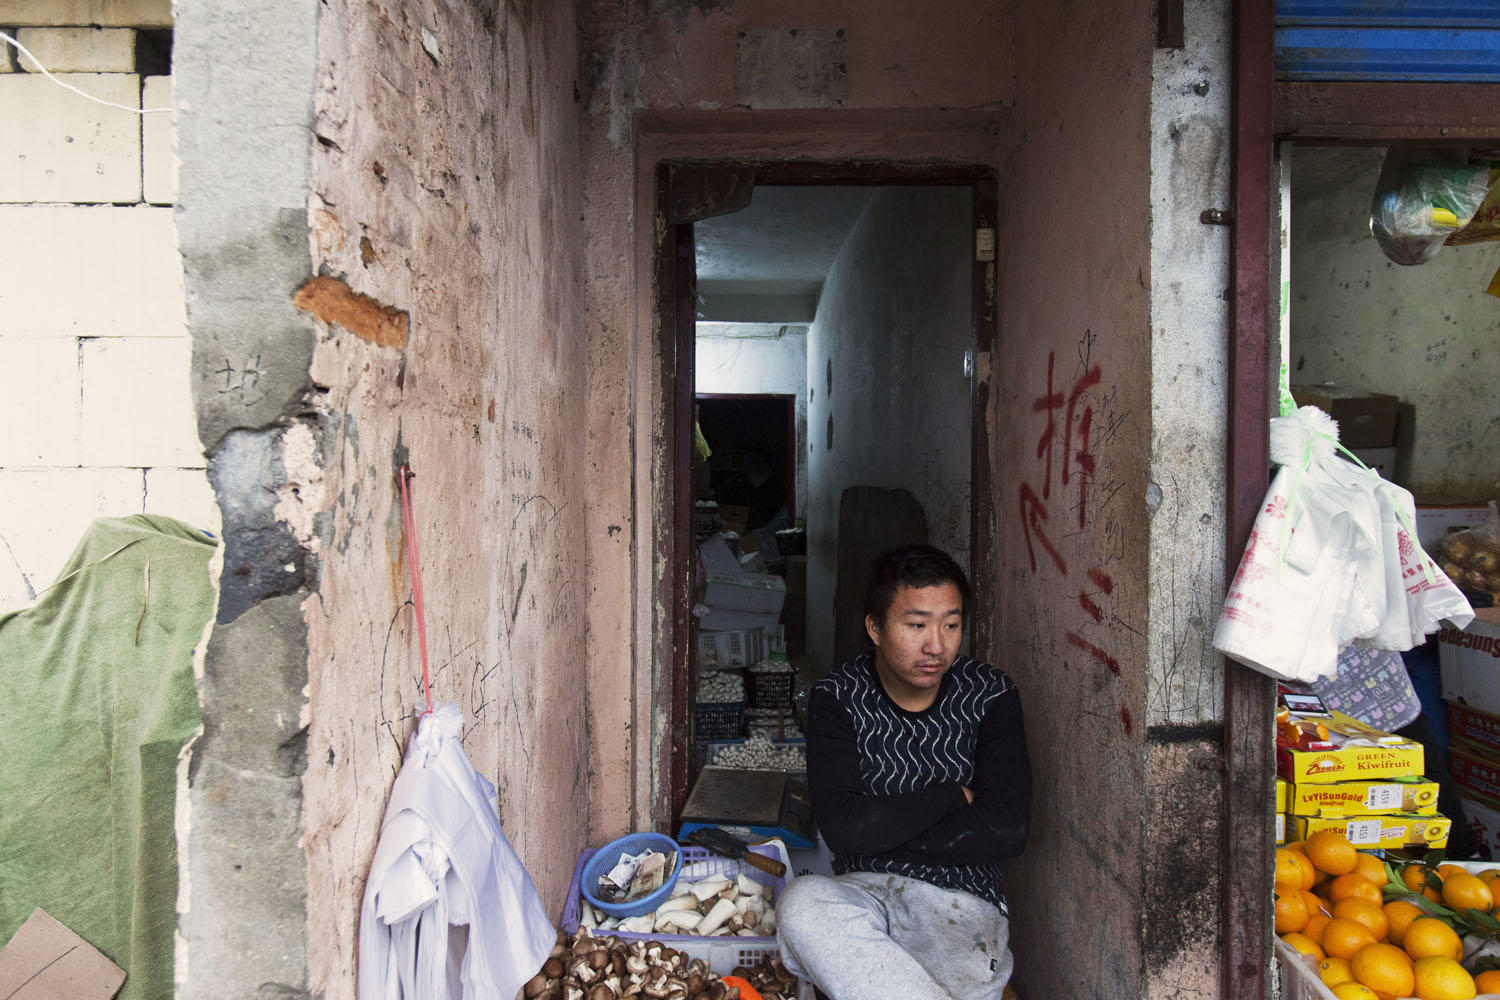 Merchant sits outside of his makeshift fruits and vegetables shop, that is soon to be removed from the main road. Guangfu Road. Shanghai, China. 2015.